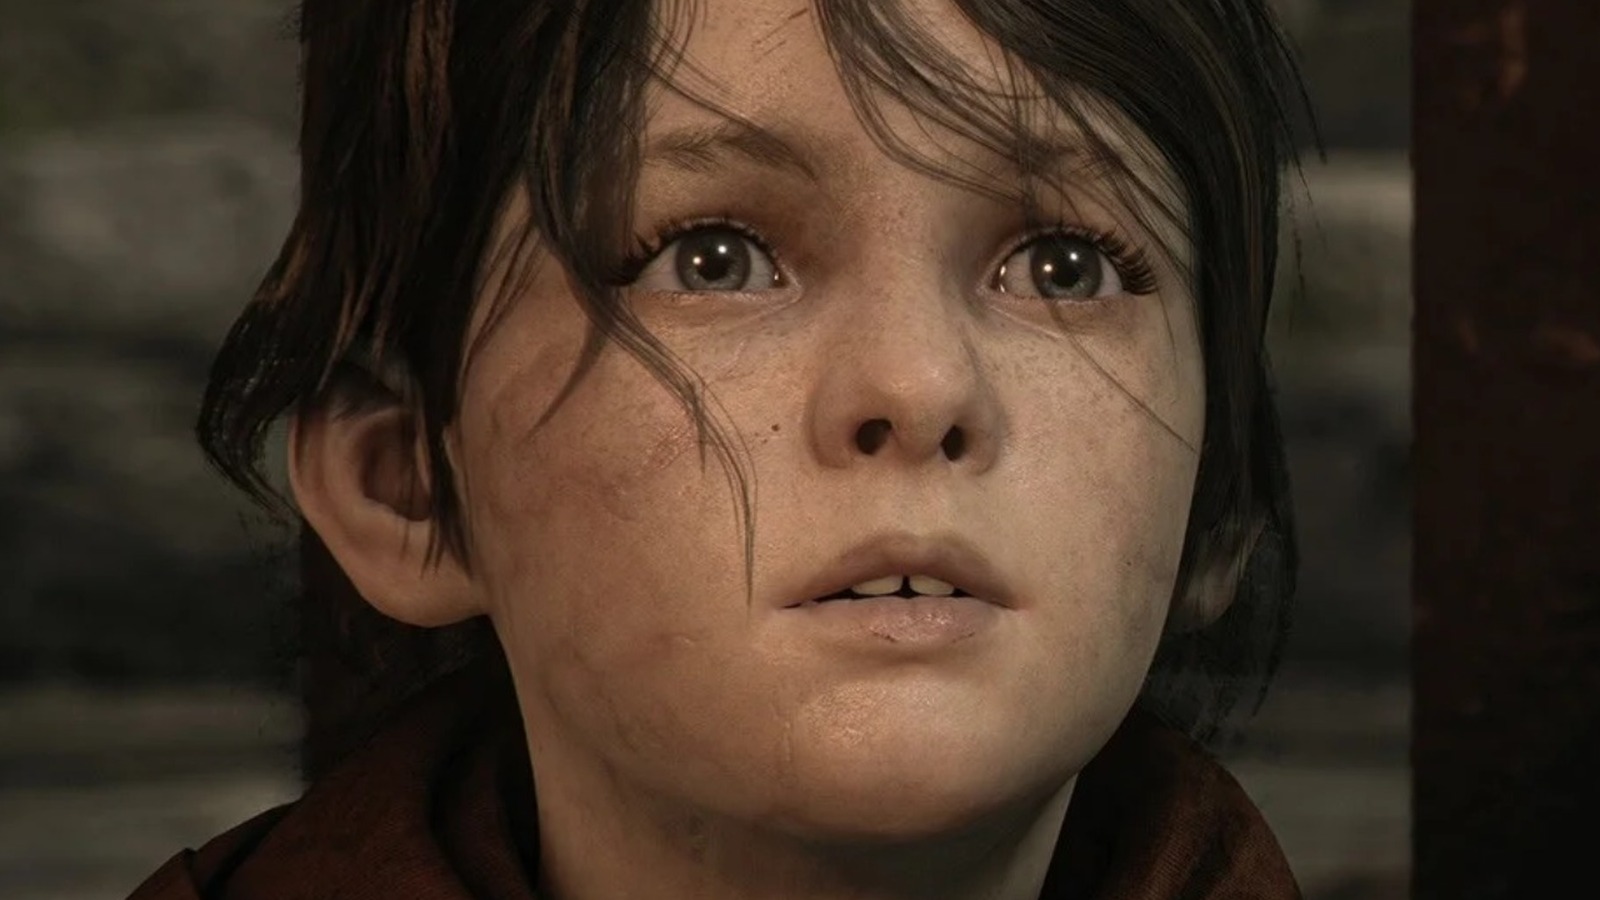 Roundup: Here's What The Critics Are Saying About A Plague Tale: Requiem